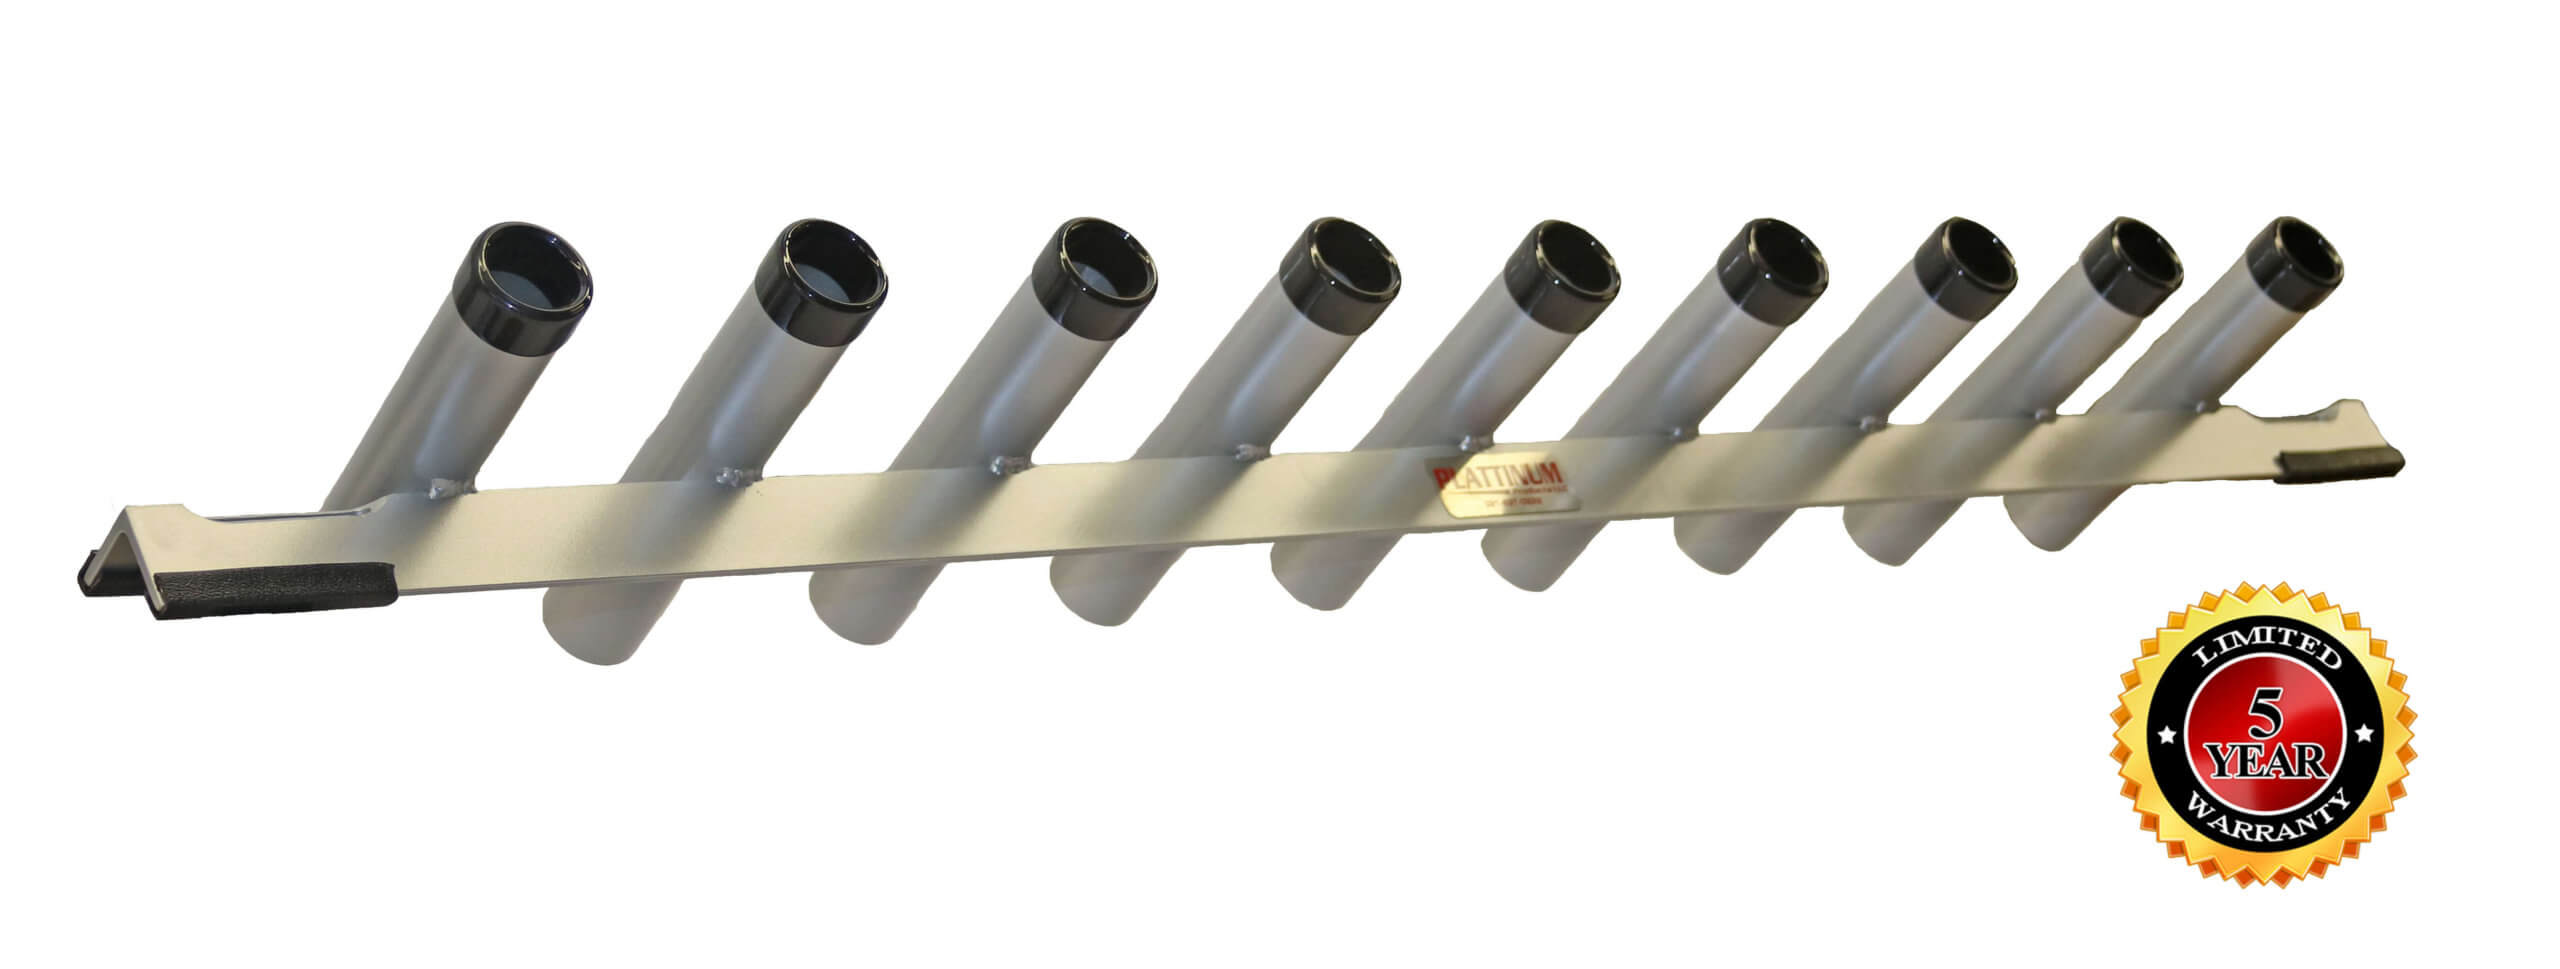 Bed Rail Rod Holder - 9 Rods - Small Size Truck Model